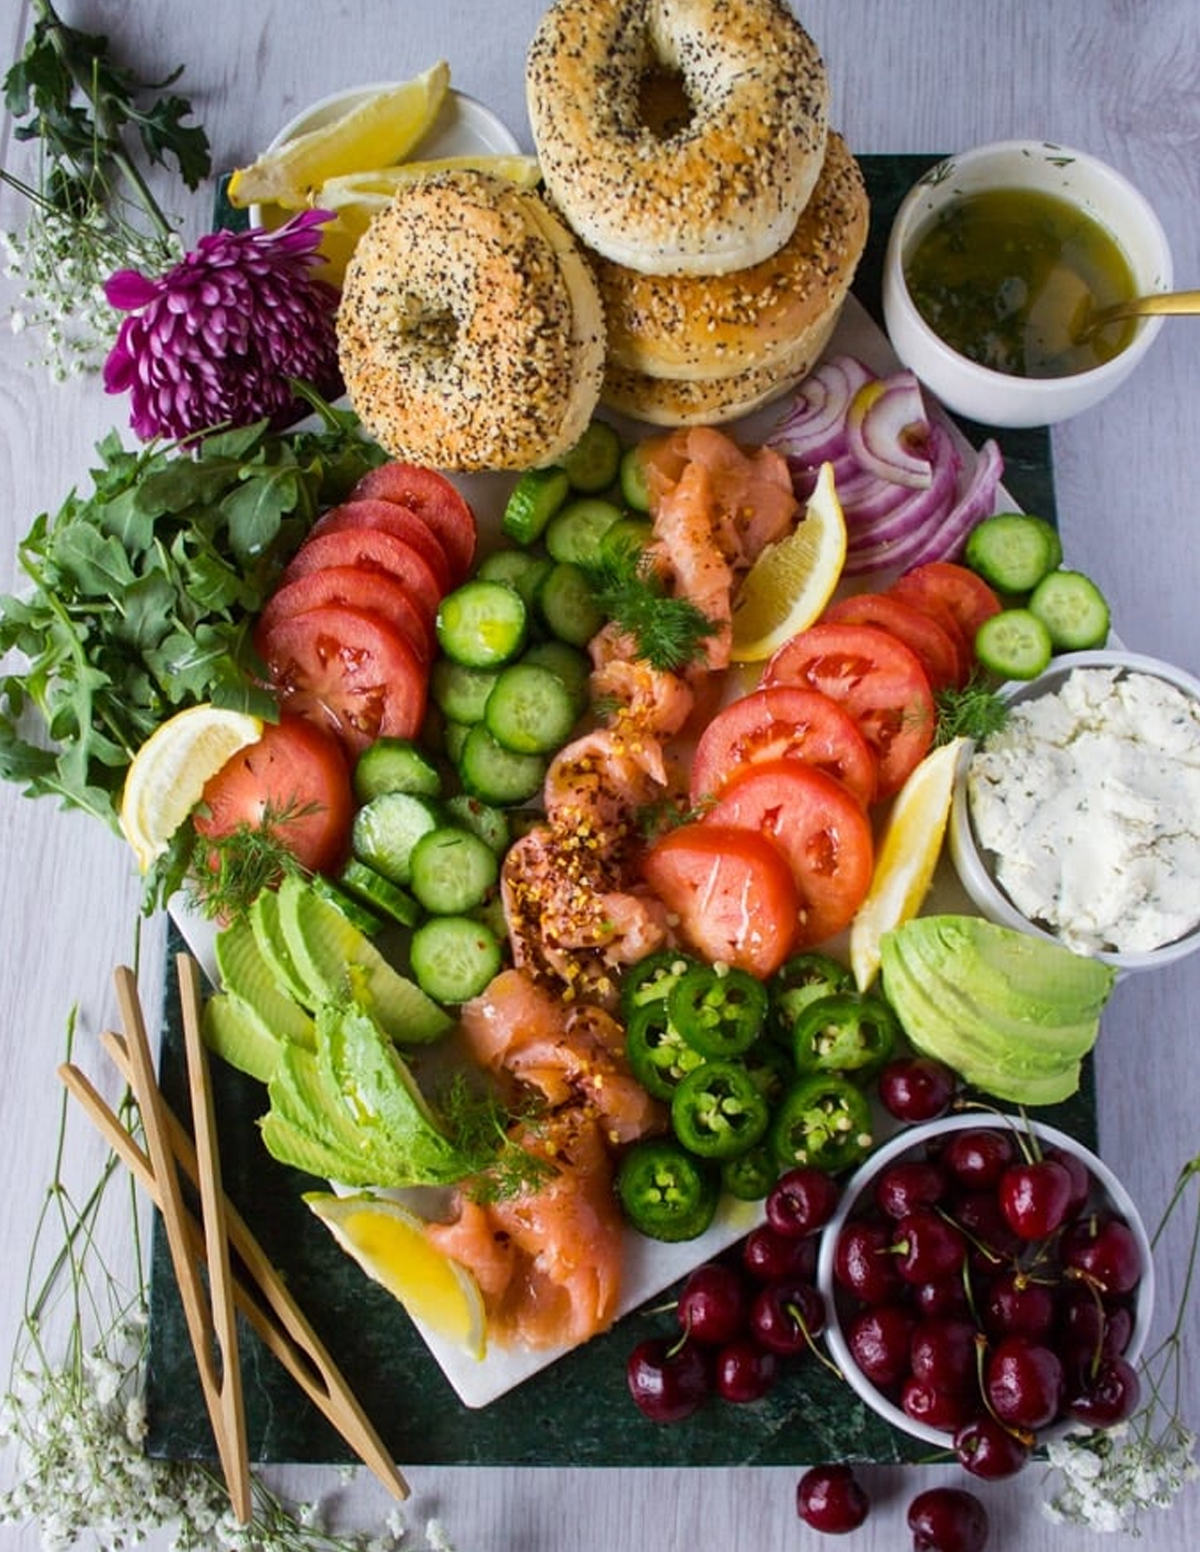 Bagels, tomatoes, dill, cucumbers, salmon, and cream cheese are included on Two Purple Figs charcuterie board.